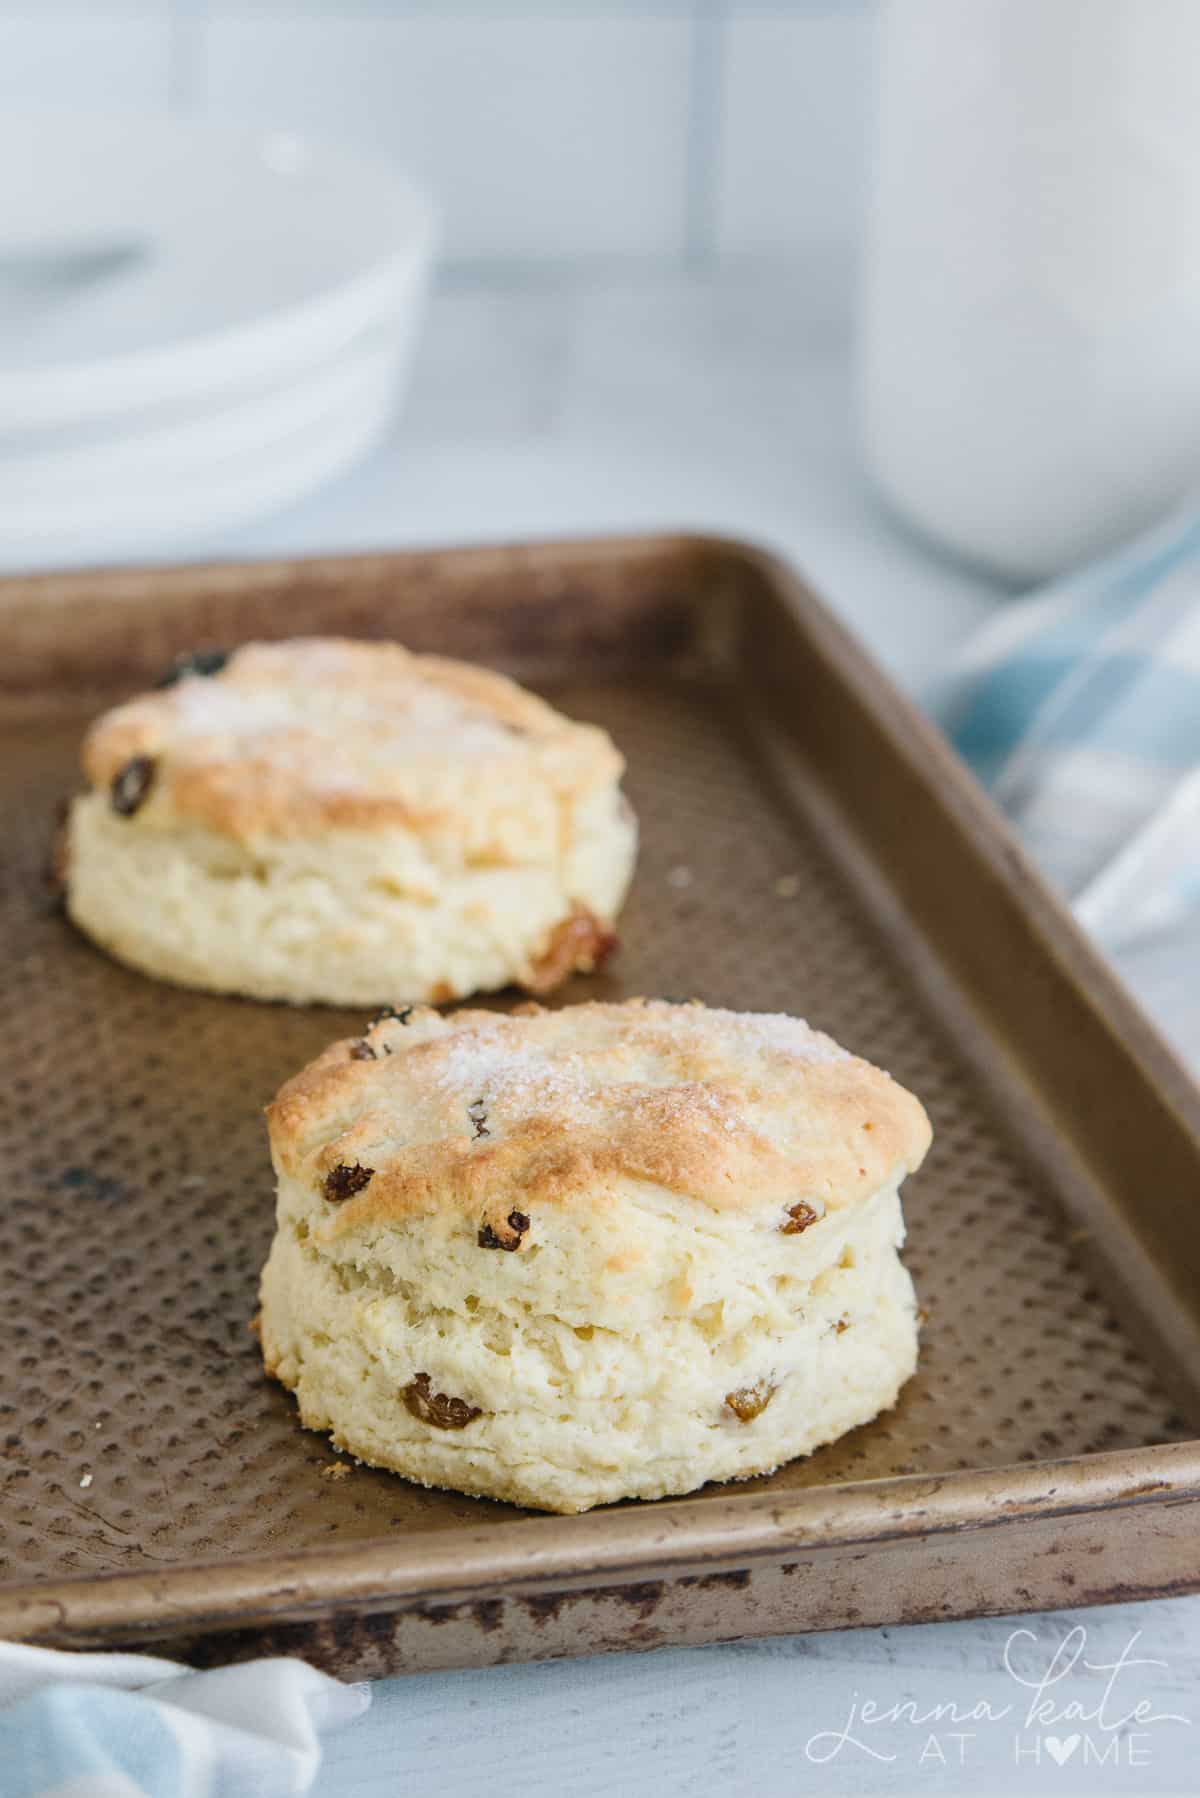 Close up of the fluffy scone with raisins visible and a golden brown top